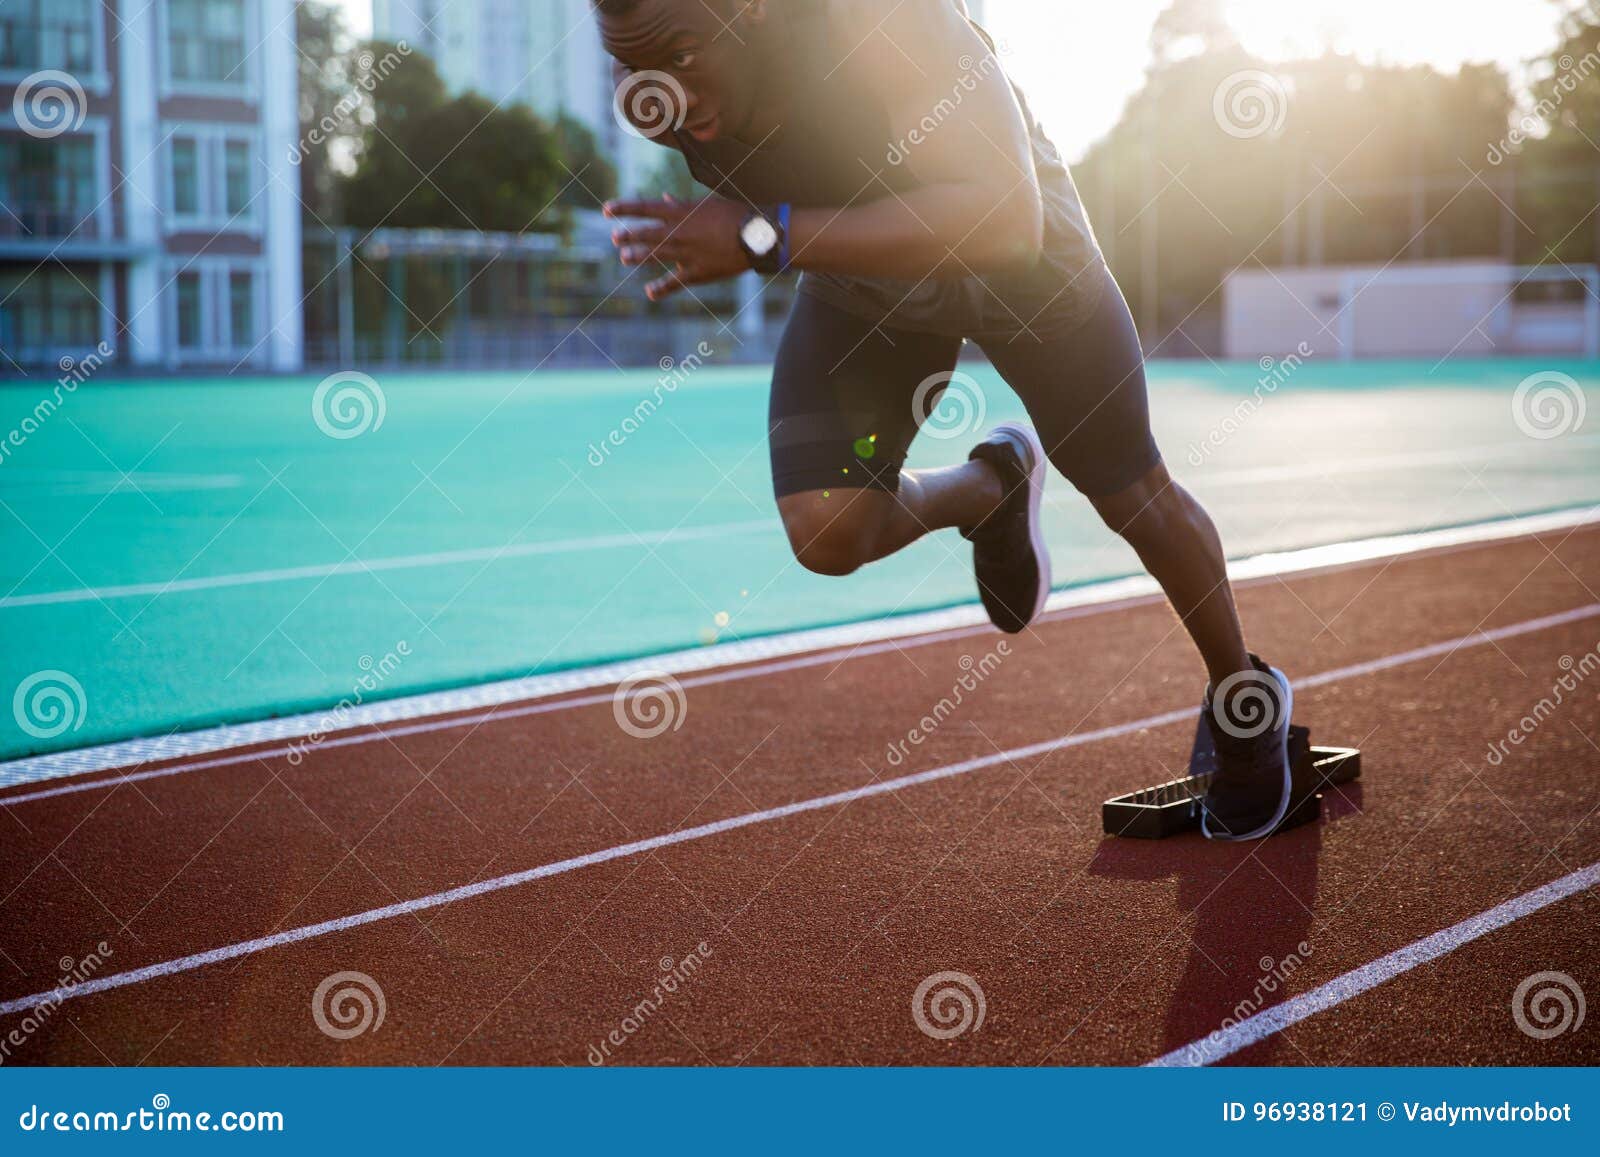 Cropped Image of a Young African Male Athlete Stock Image - Image of ...